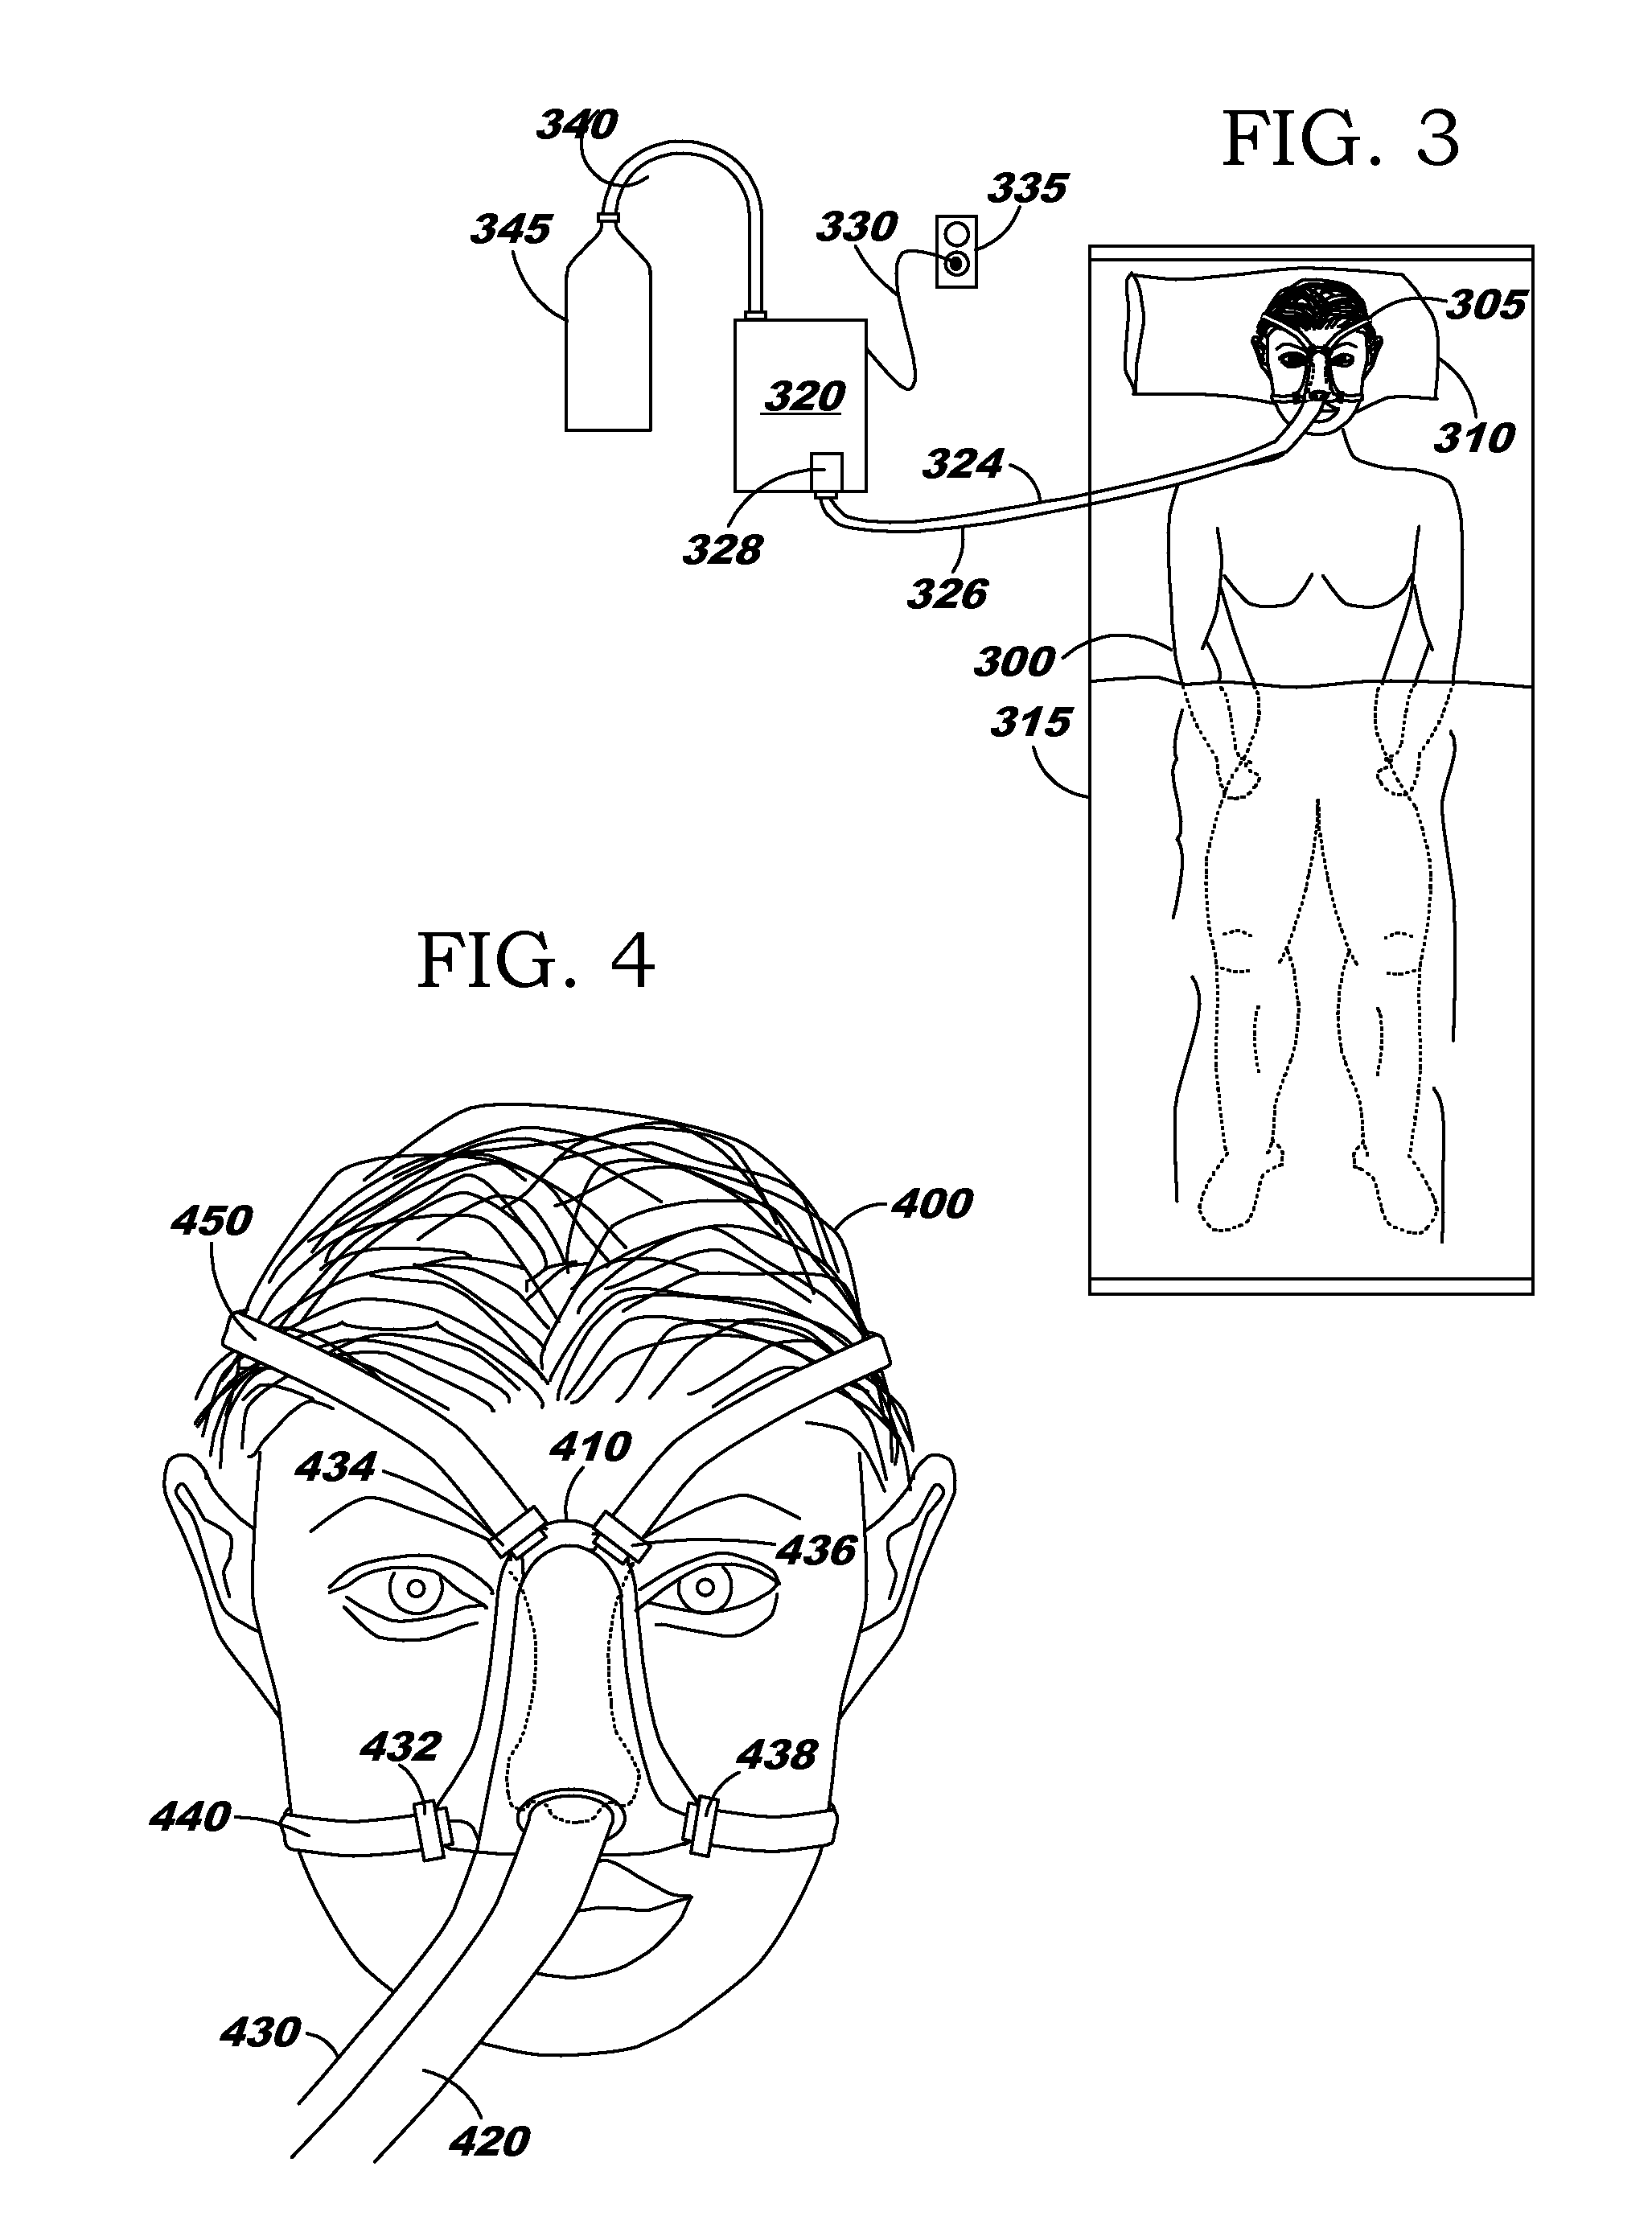 Managing an active strap system for a face mask